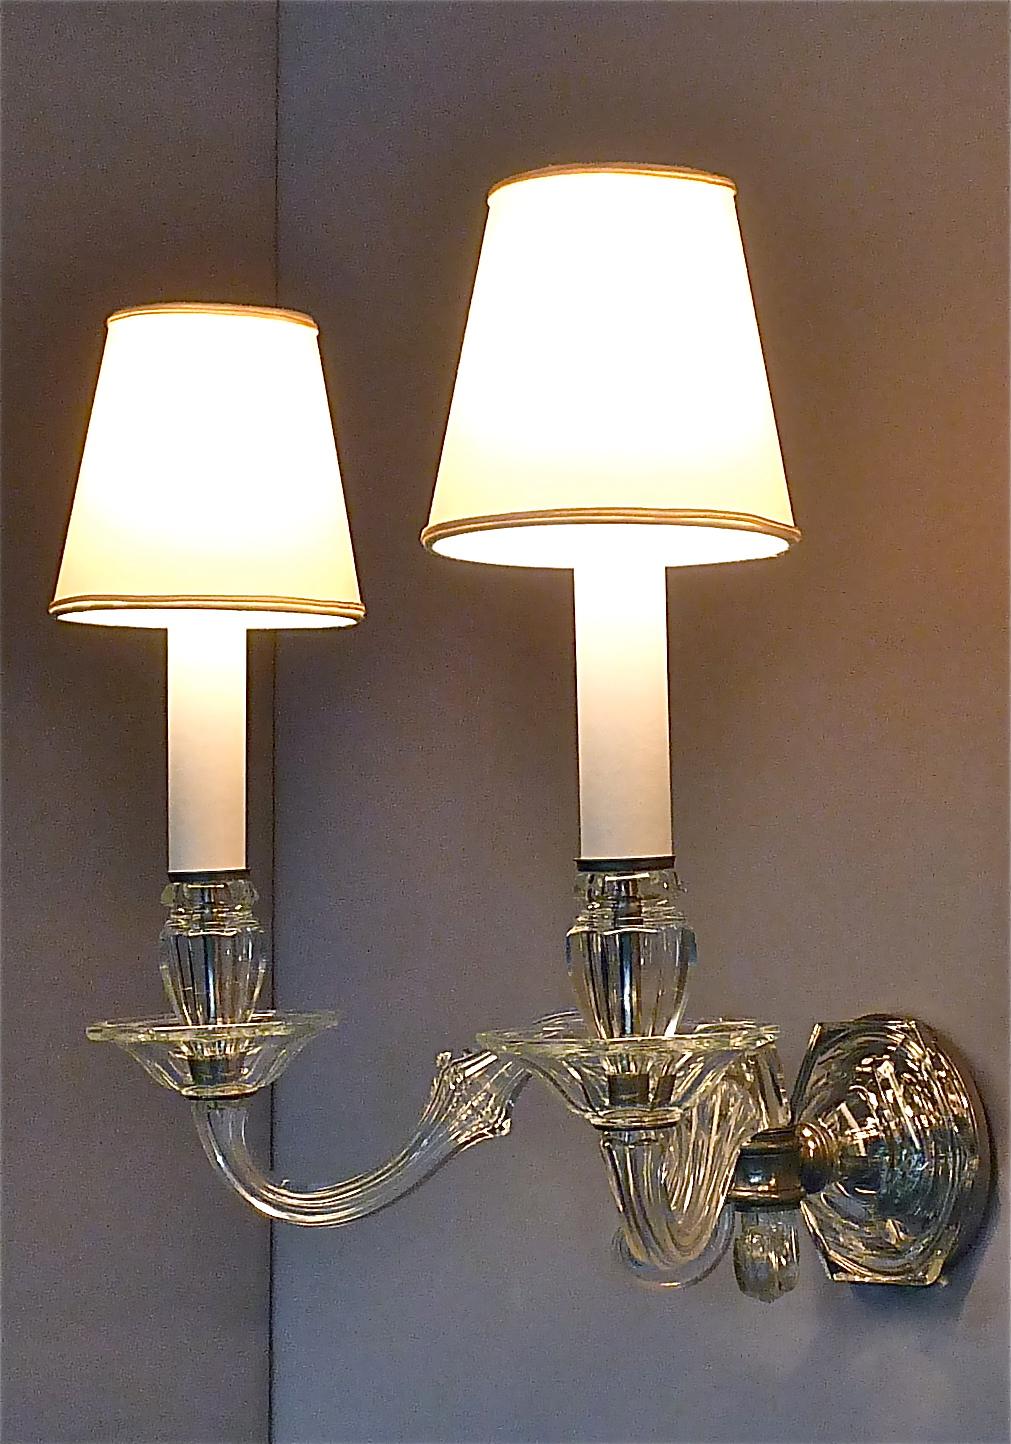 Pair of Art Deco Faceted Crystal Glass Wall Lights Sconces 1920, Baccarat Style 8